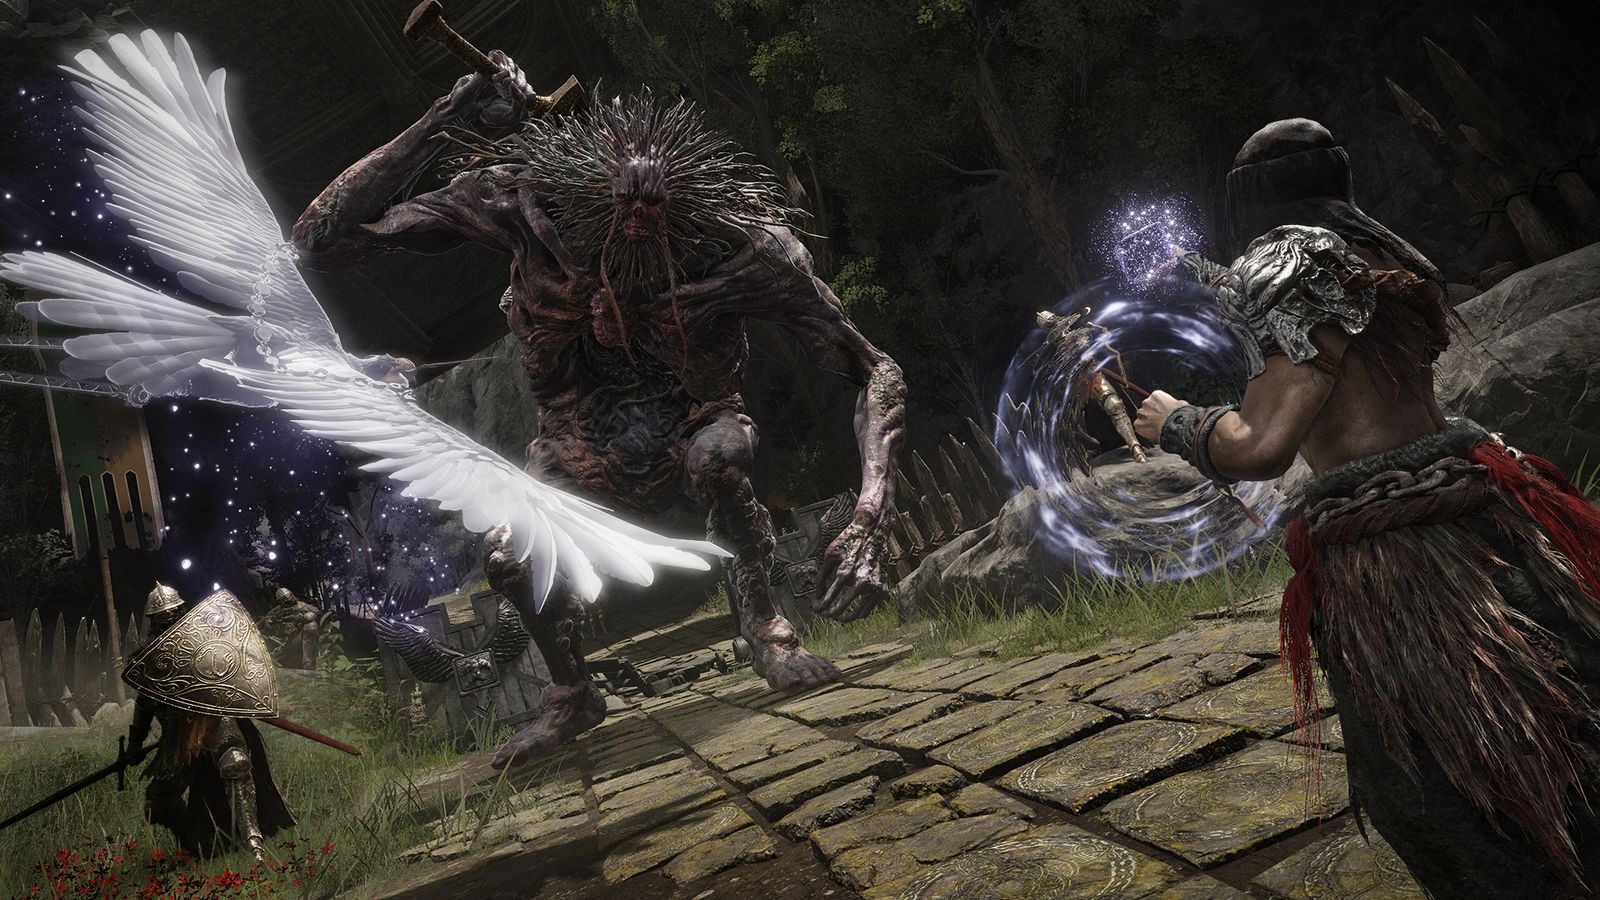 Two players face the Stonedigger Troll in Elden Ring.